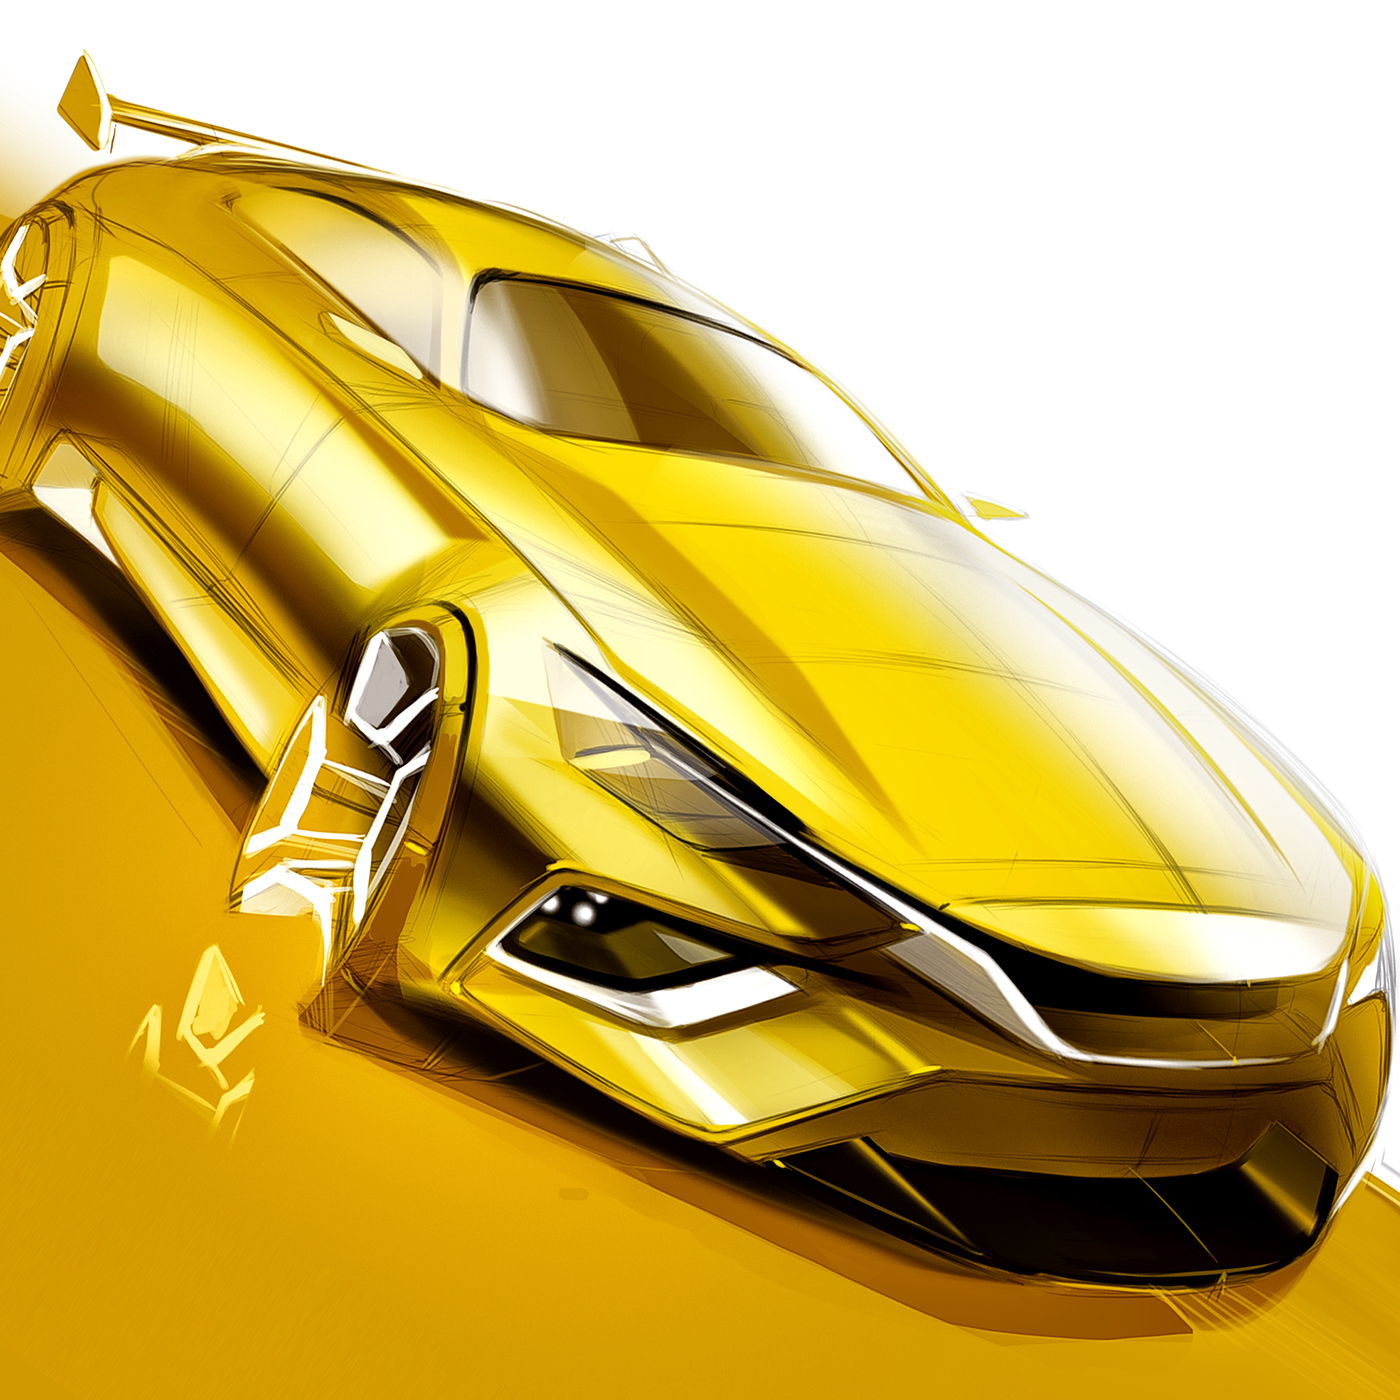 Car Drawing and Sketching Tutorial - How to Draw a Car on Behance